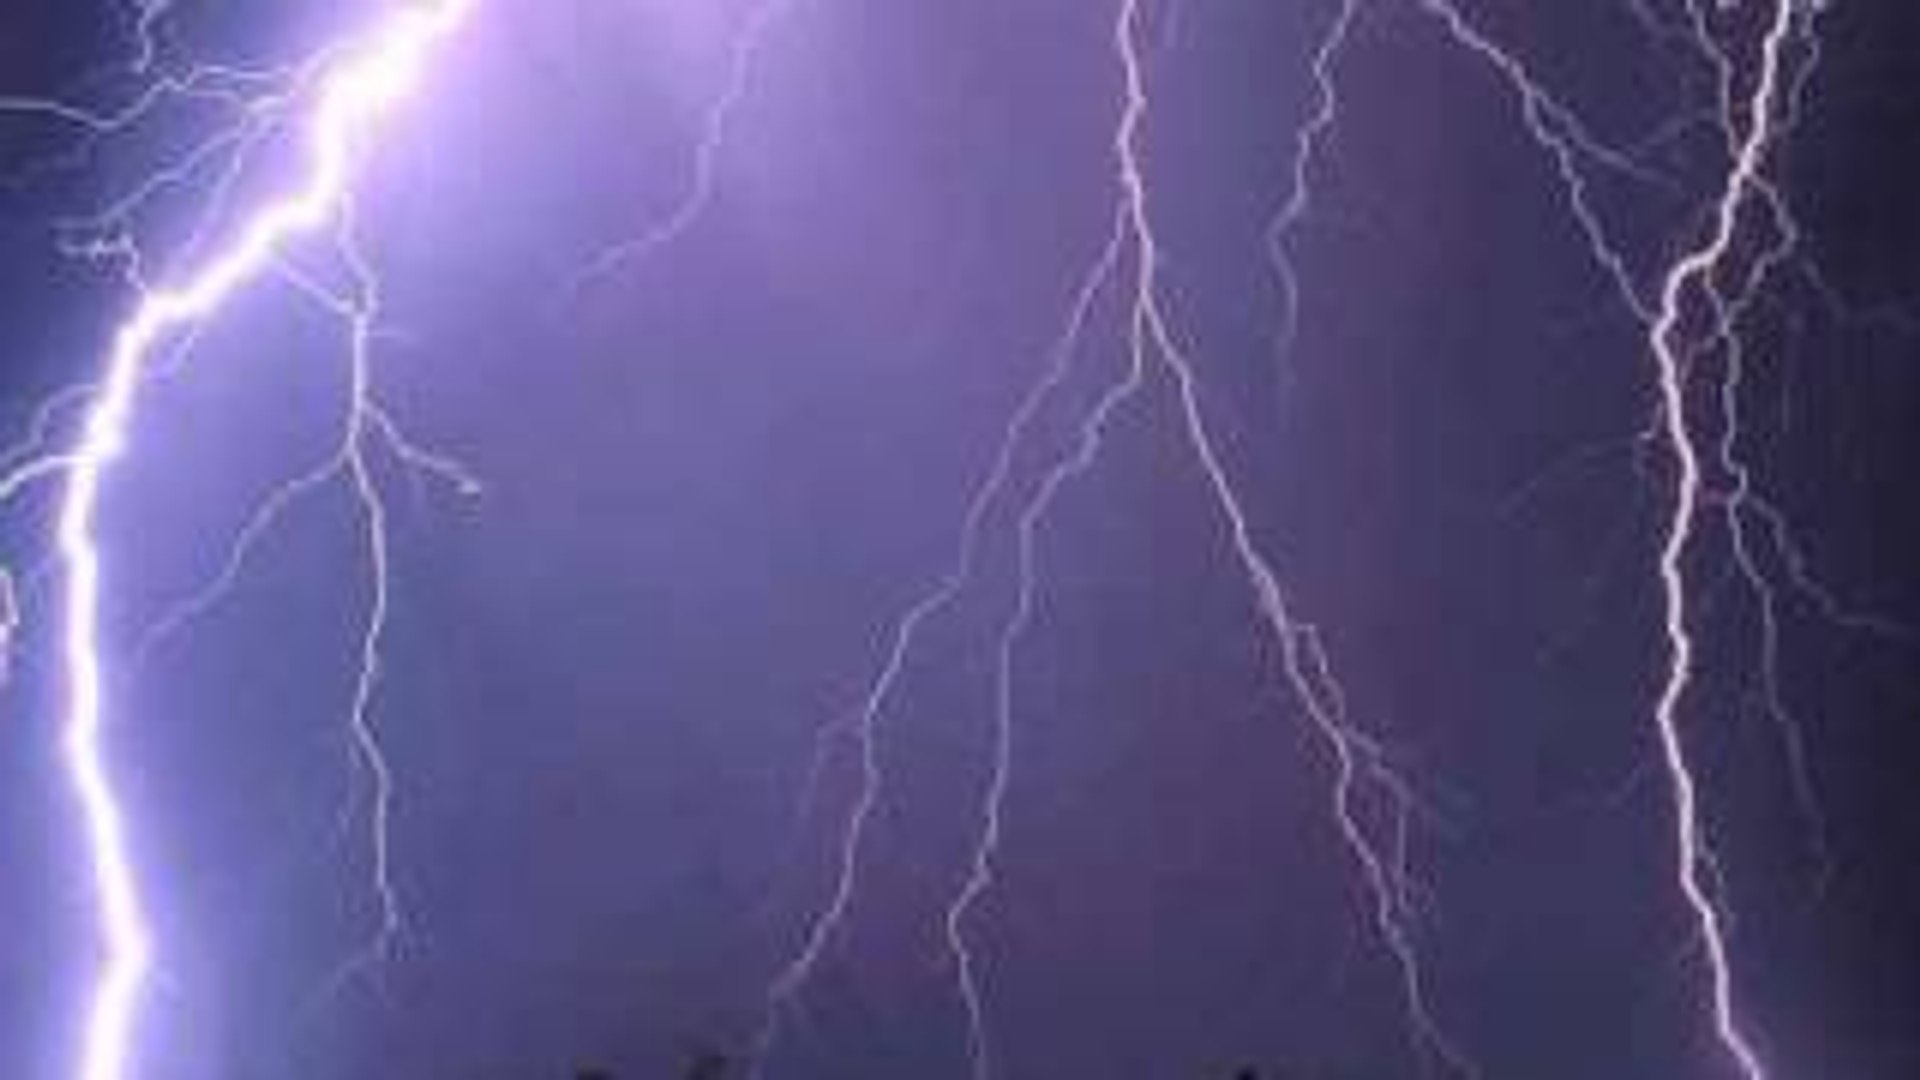 Sounds of Nature : Thunder and Rain (No Music)